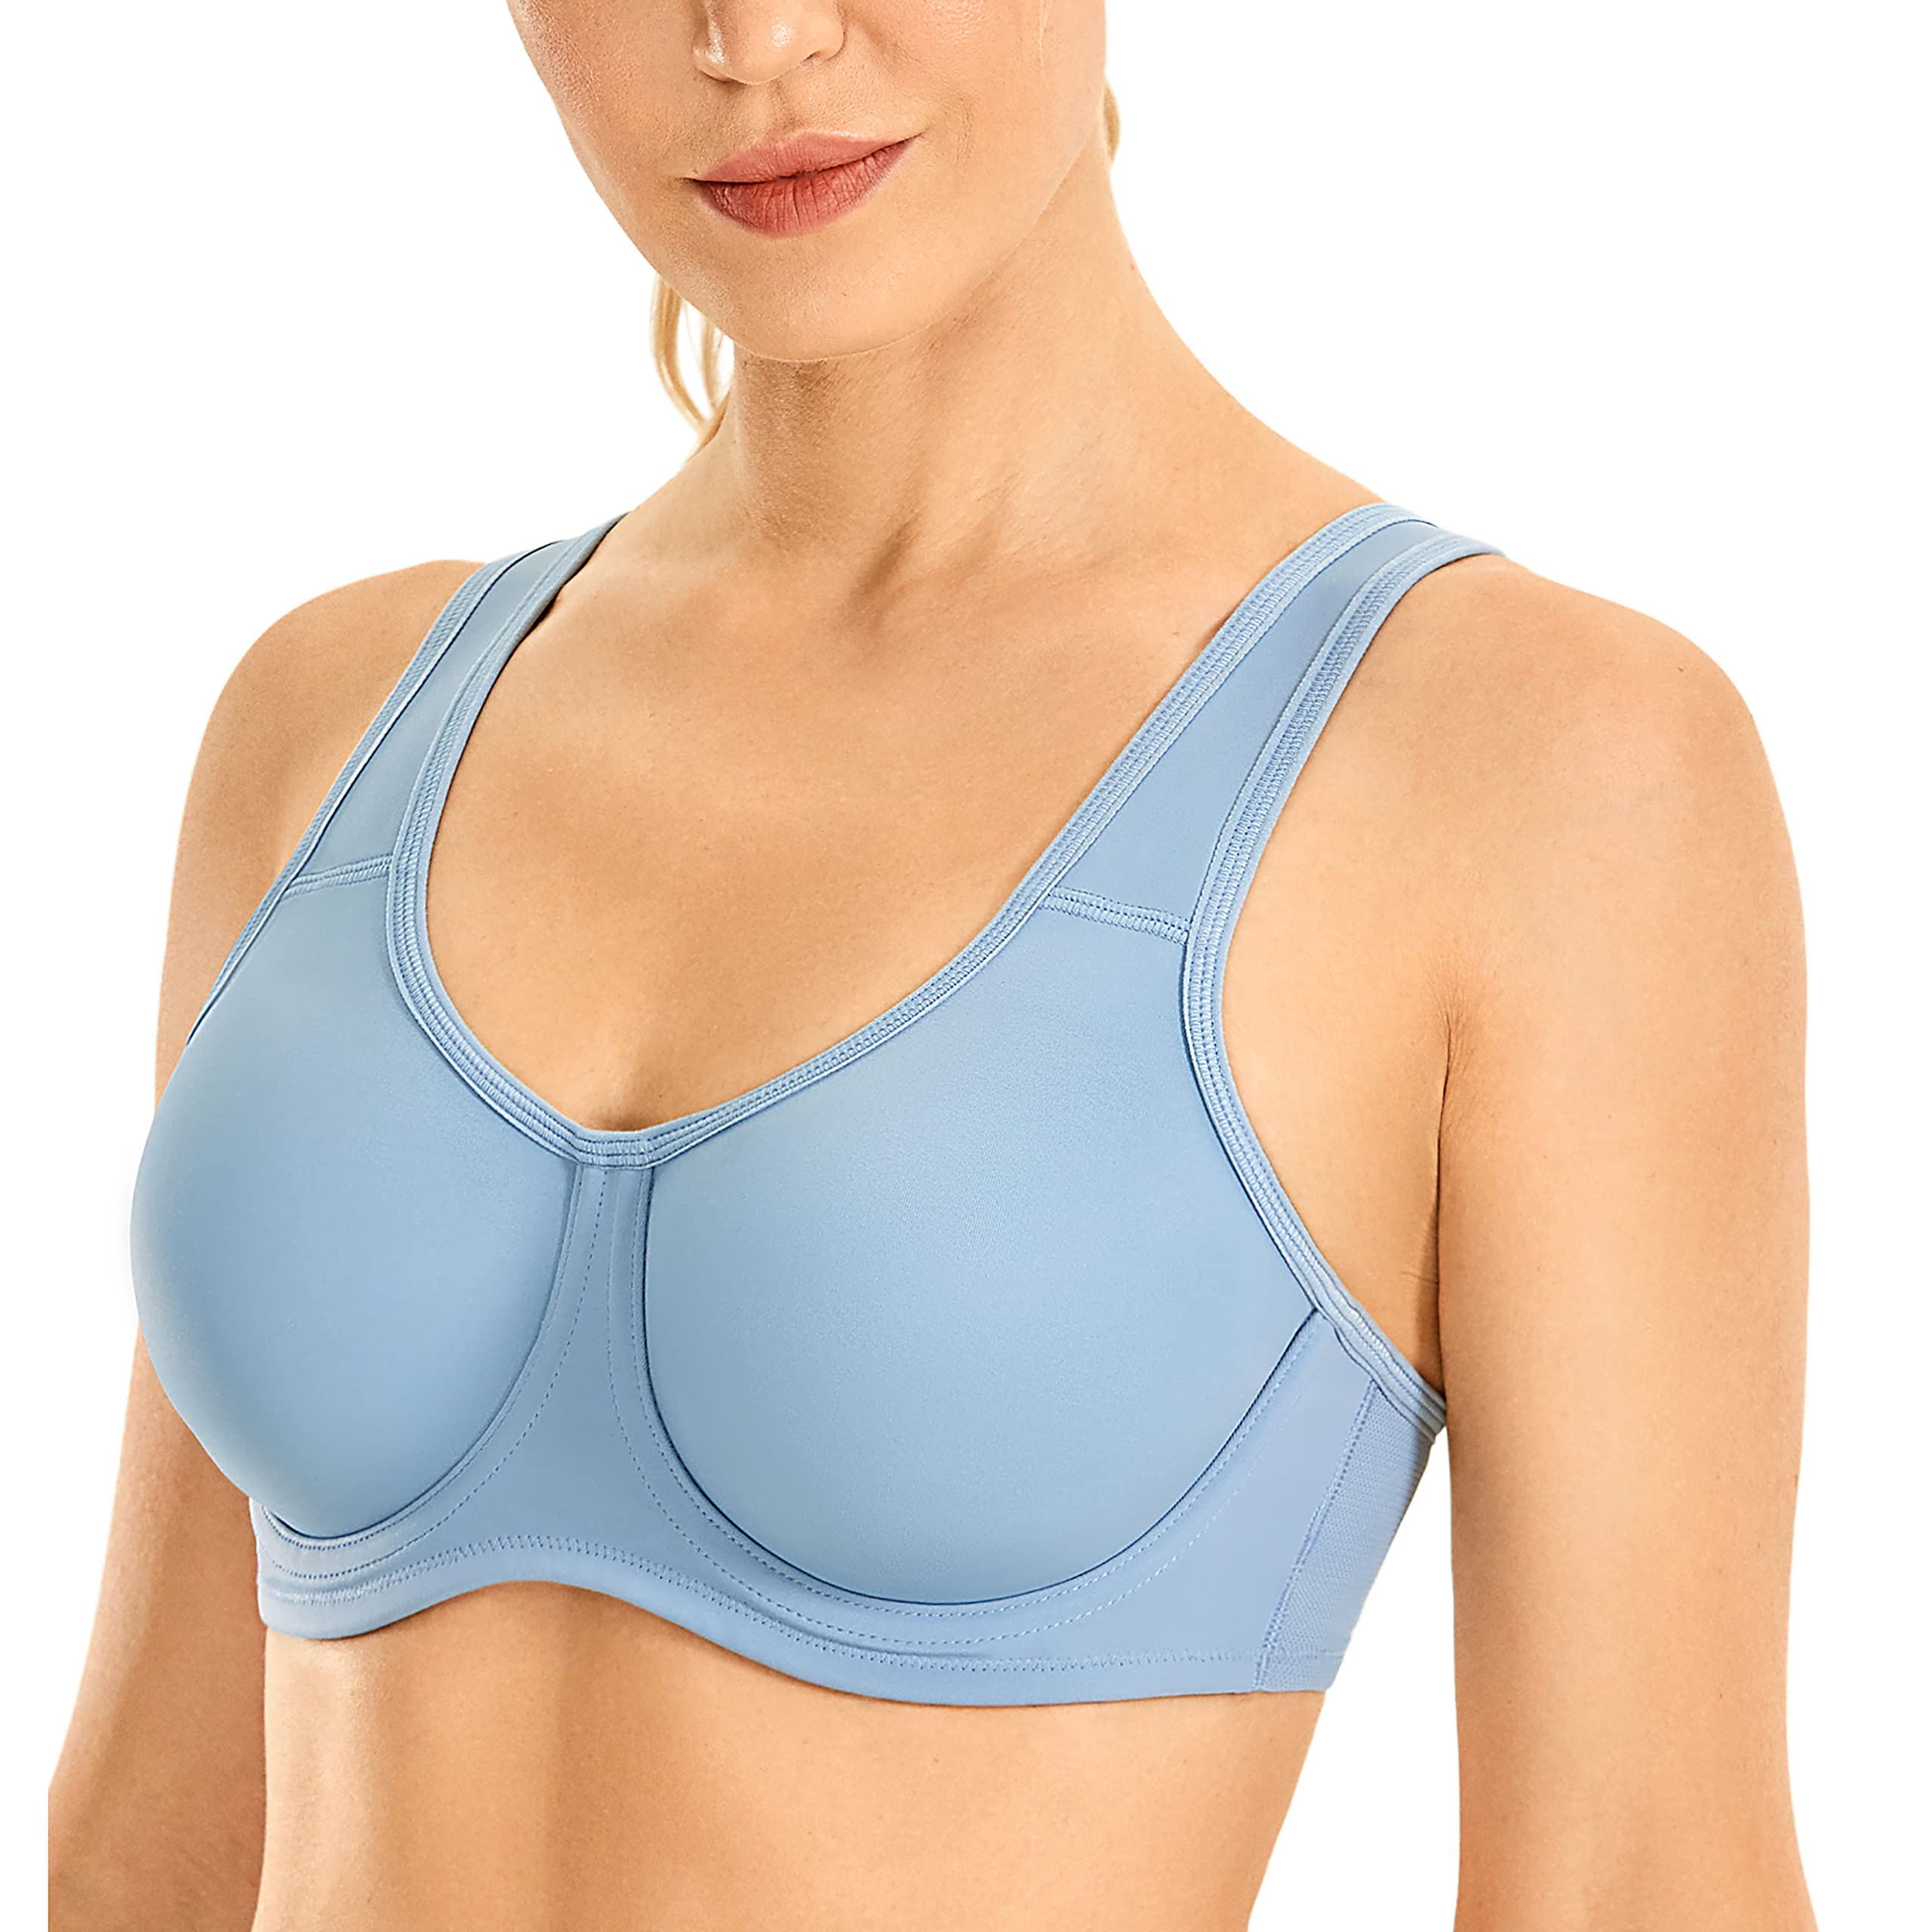 SYROKAN Womens Max control Underwire Sports Bra High Impact Plus Size with Adjustable Straps Lotus Root grey Blue 38g